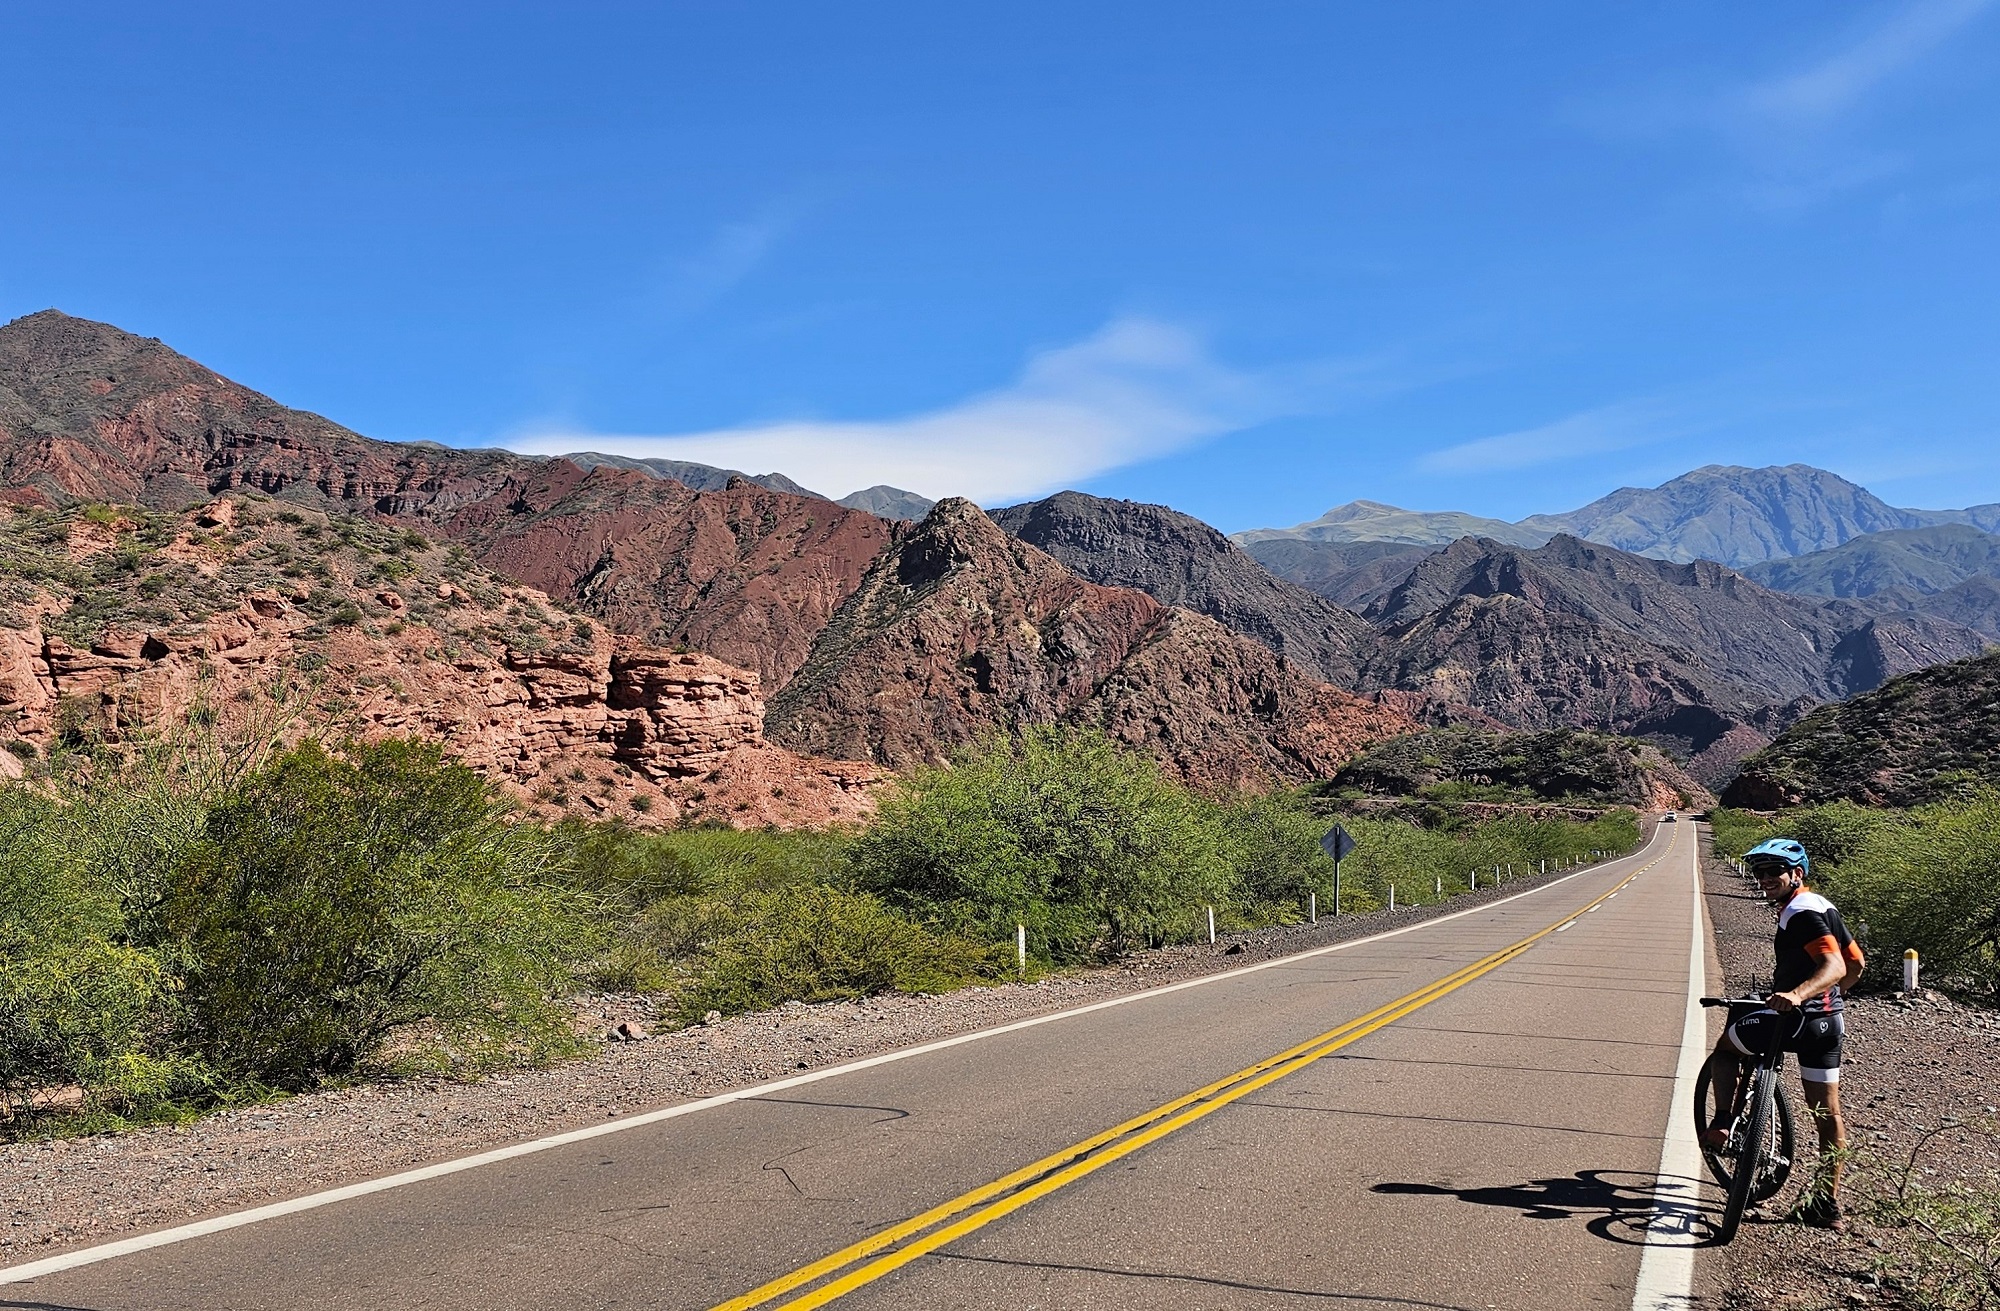 Photos from our North Argentina Cycling Holiday